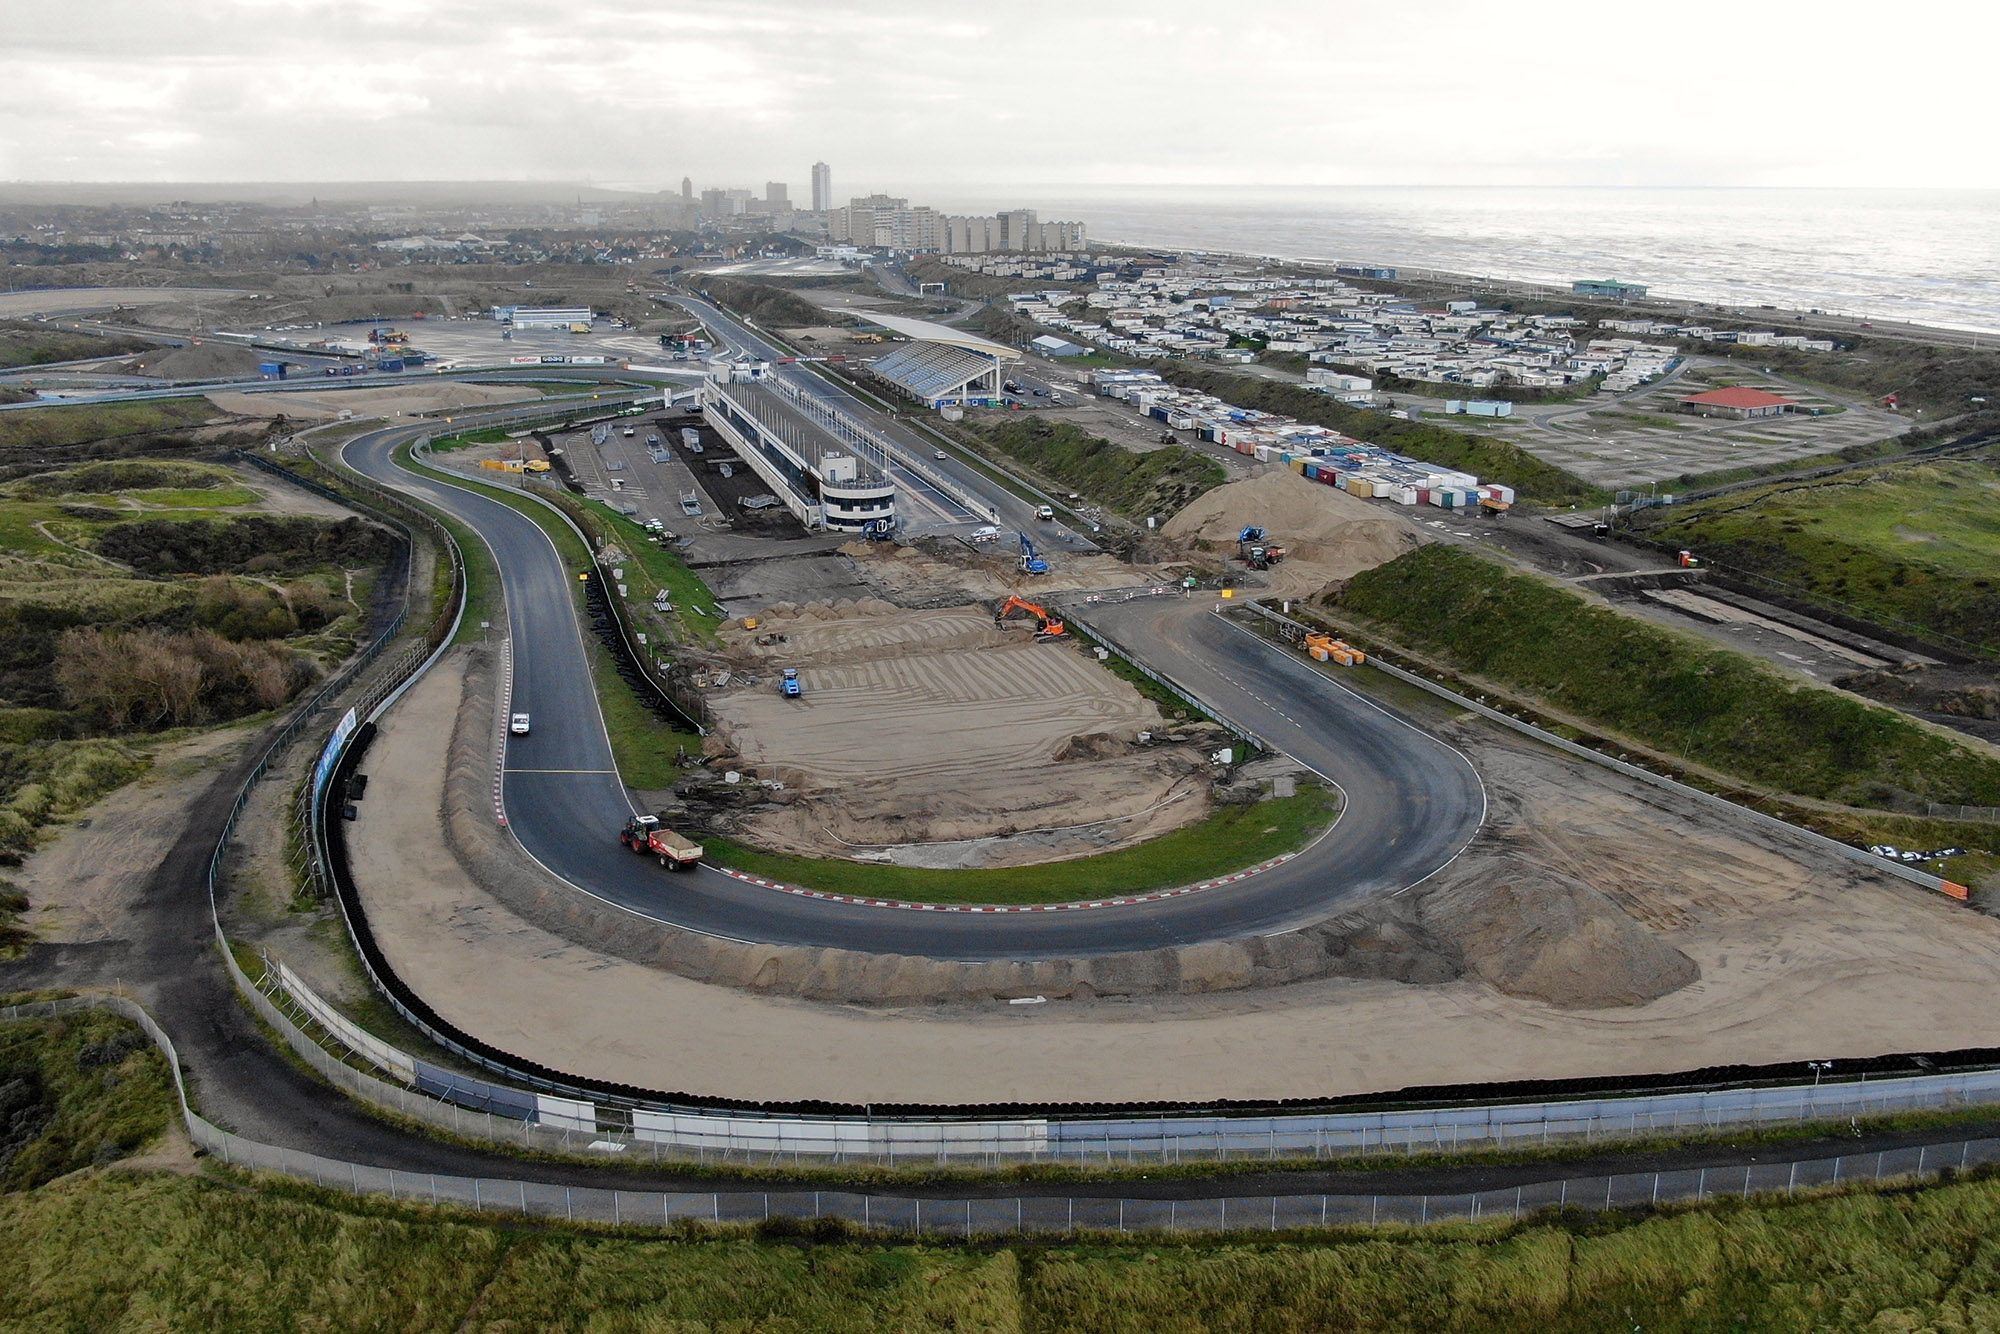 Construction work at Zandvoort as seen from Turn One